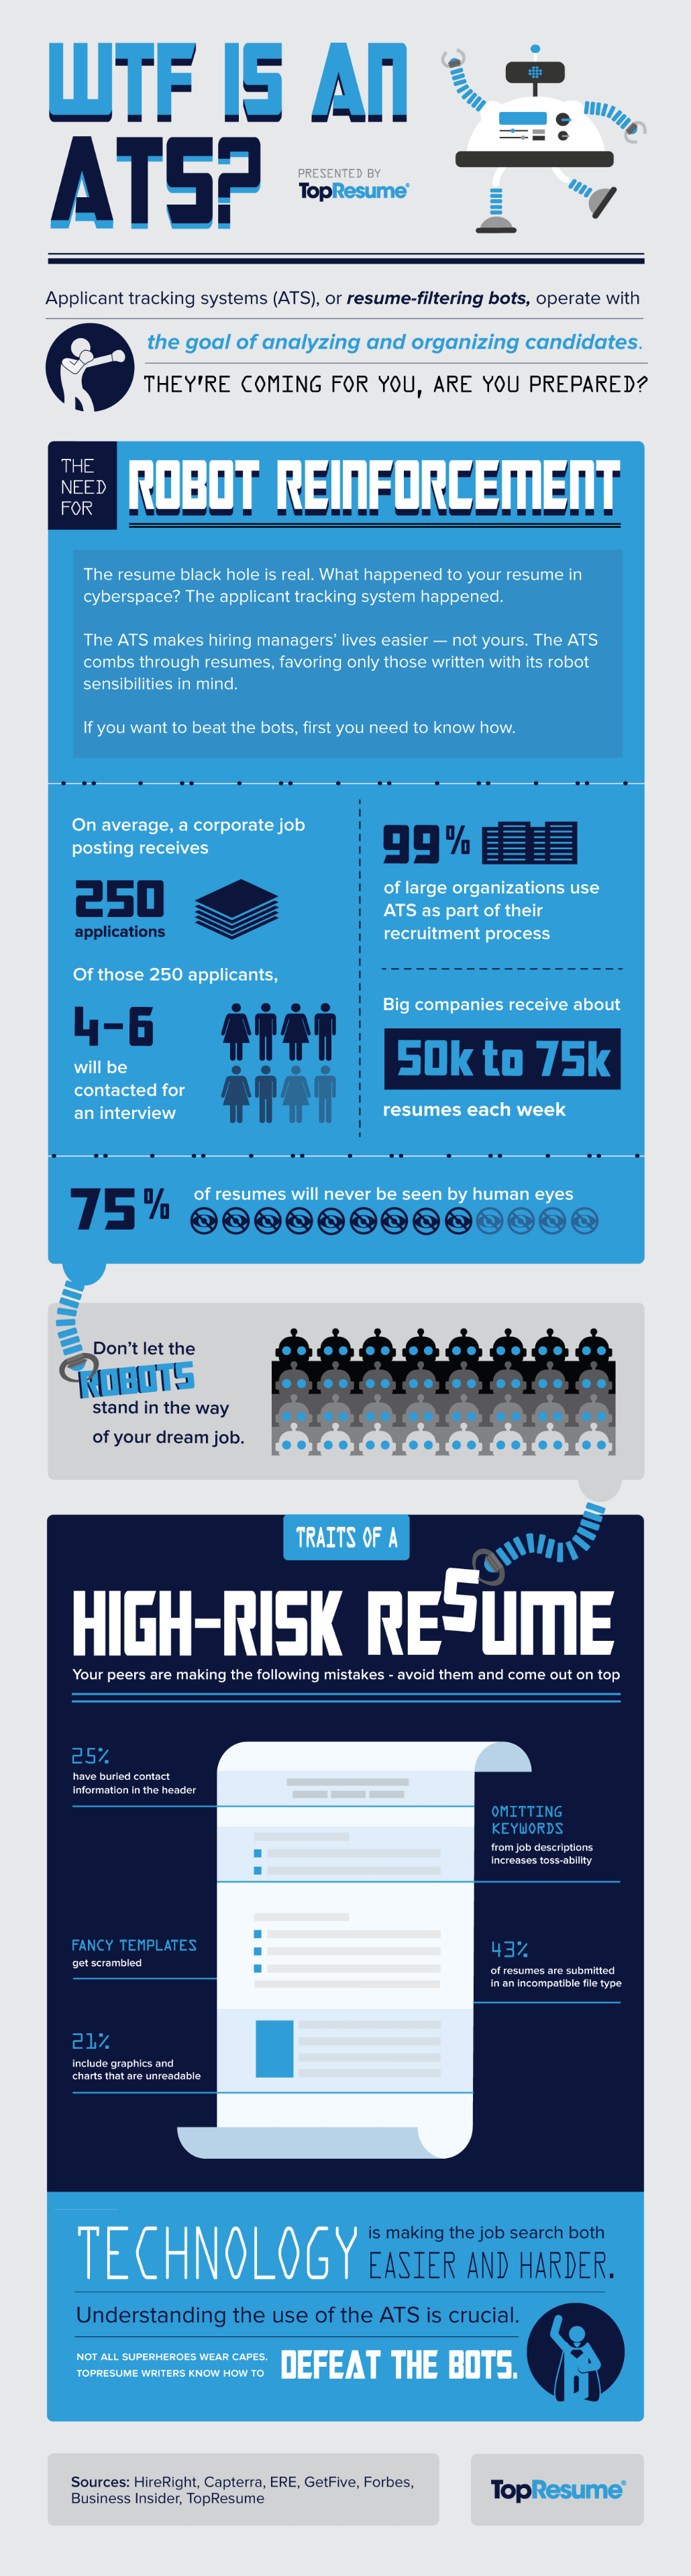 TopResume Infographic How to Write an ATS Resume